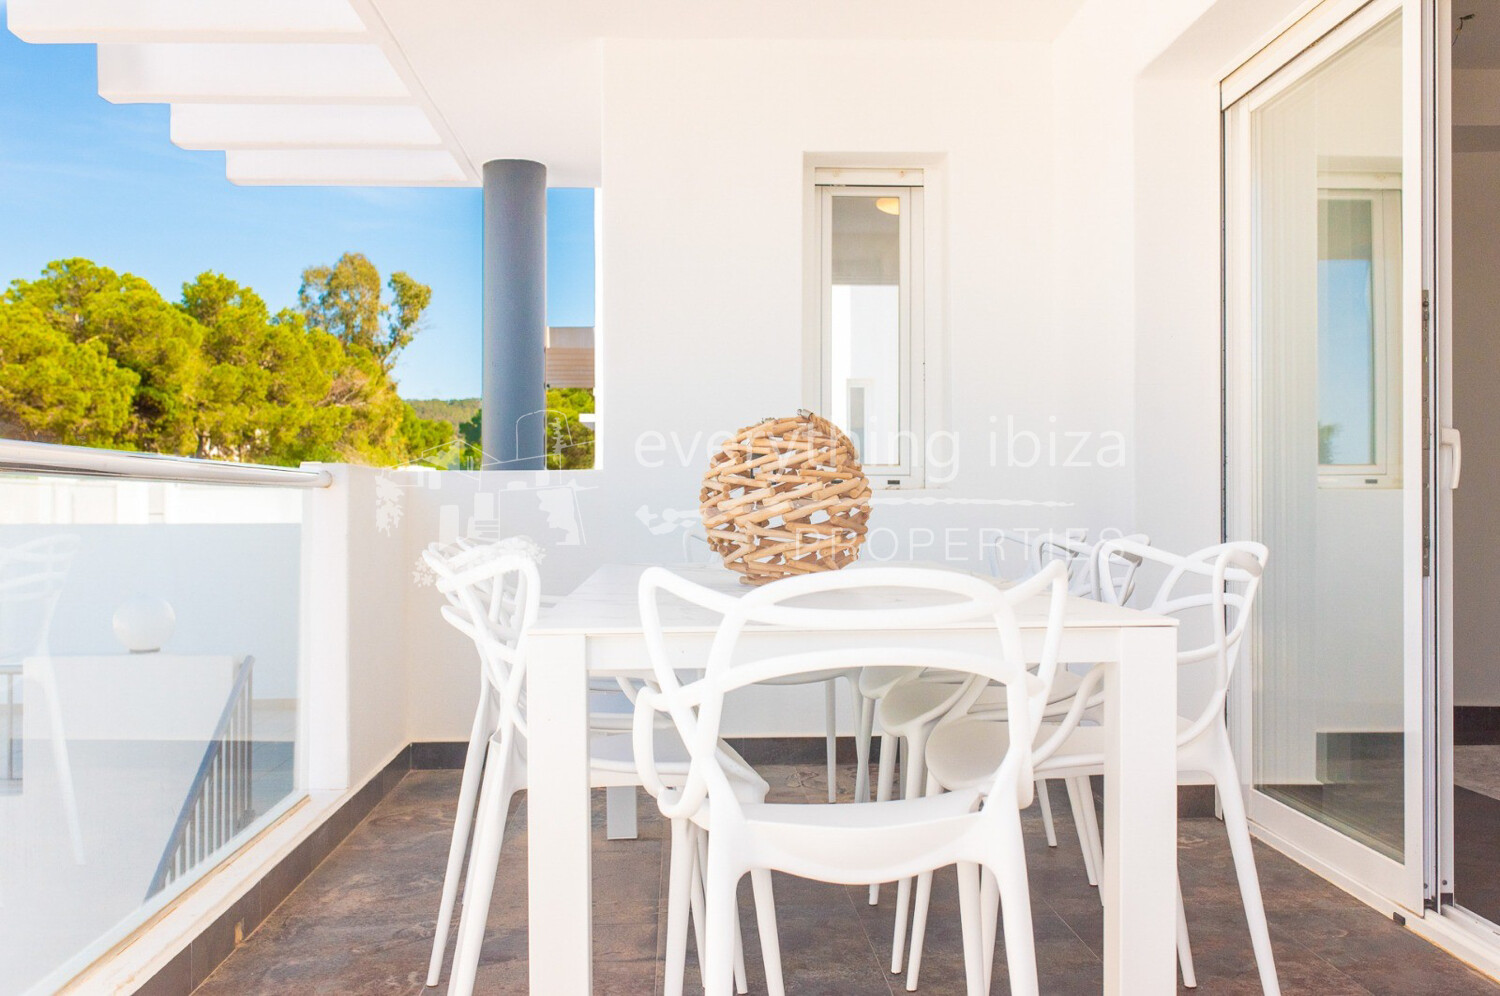 Elegant 5 Bedroomed Detached House with Pool and Tourist License, ref. 1721, for sale in Ibiza by everything ibiza Properties